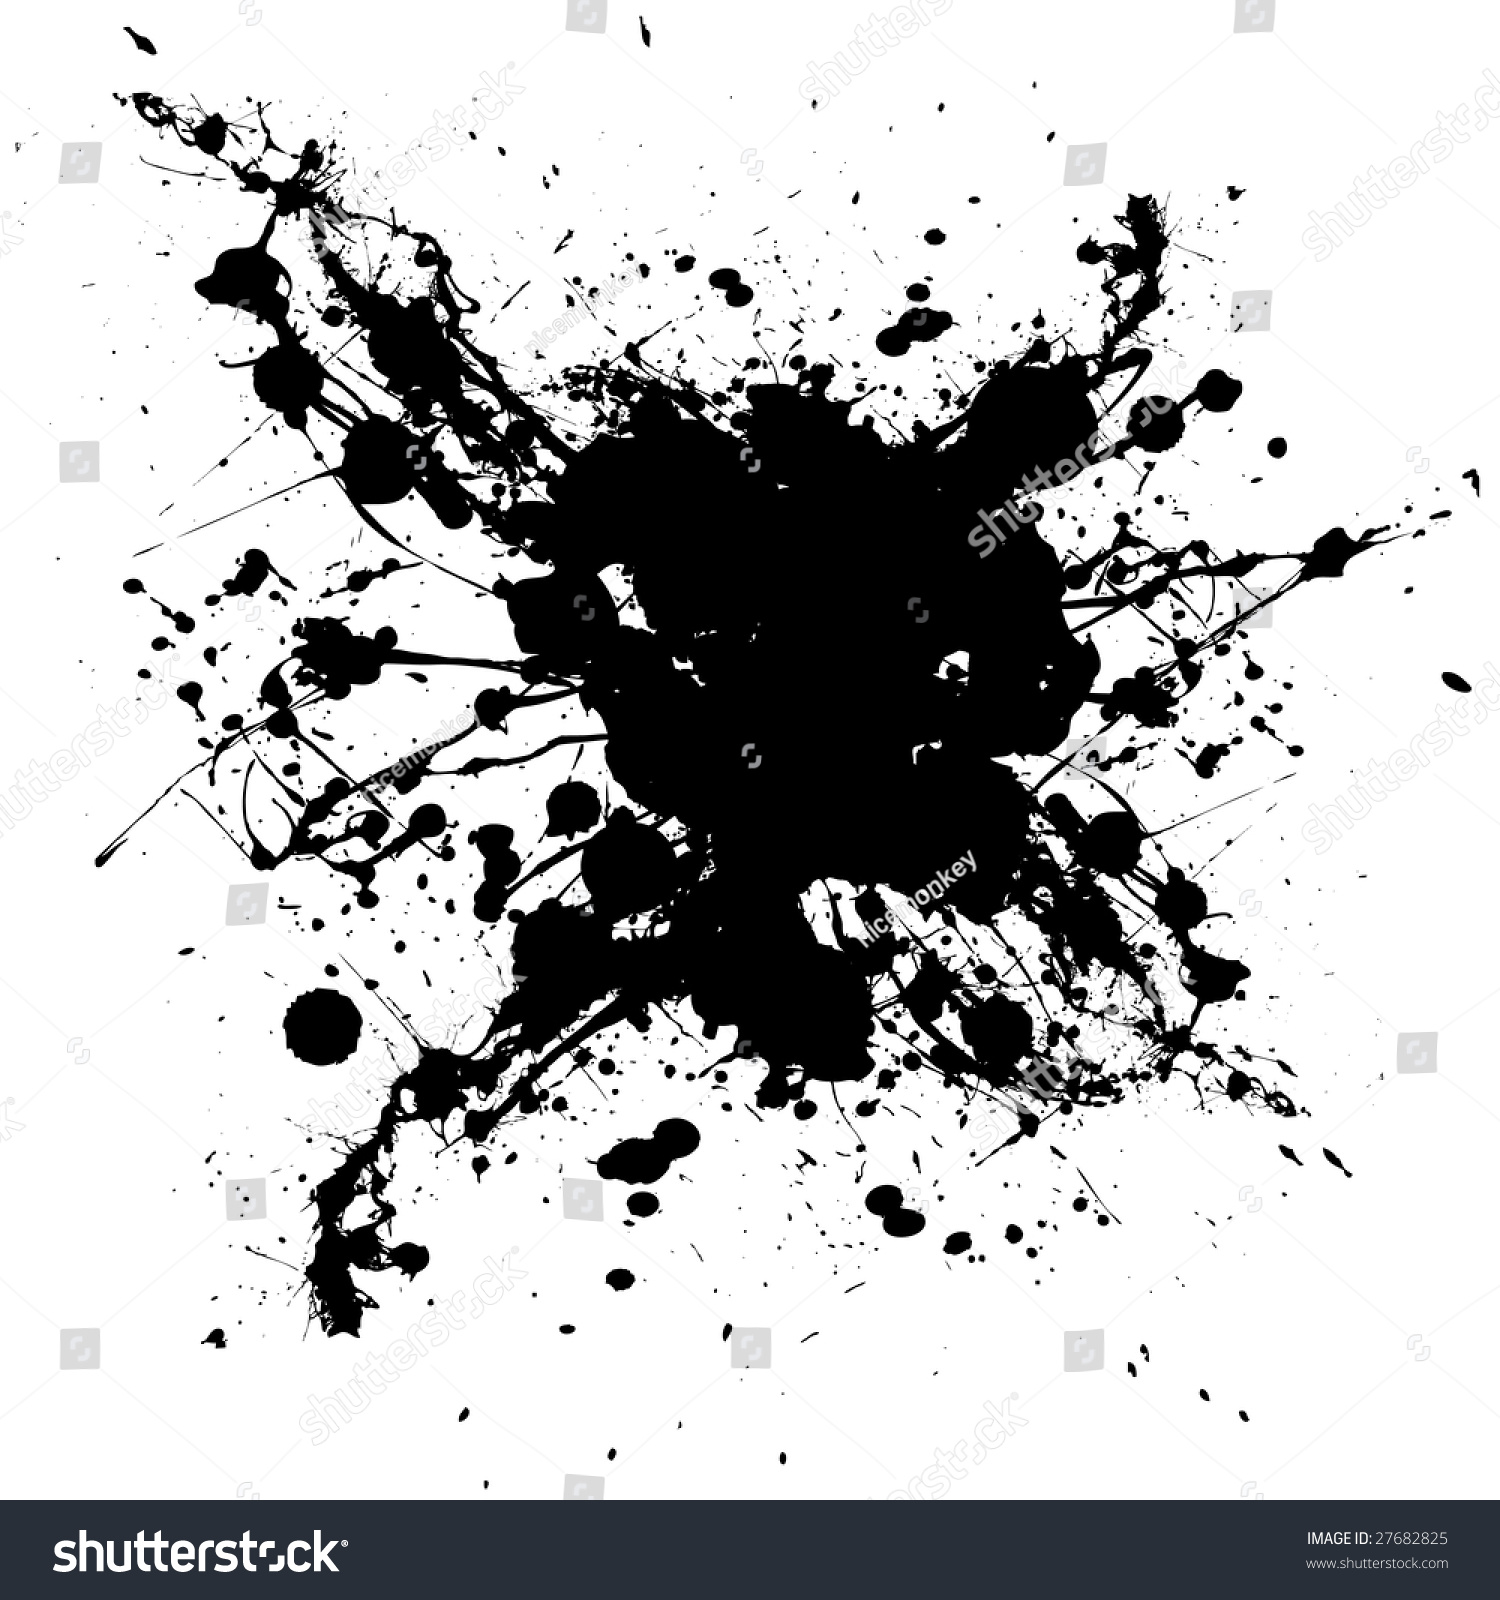 Black And White Ink Splat With Random Shapes And Dirty Grunge Effect ...